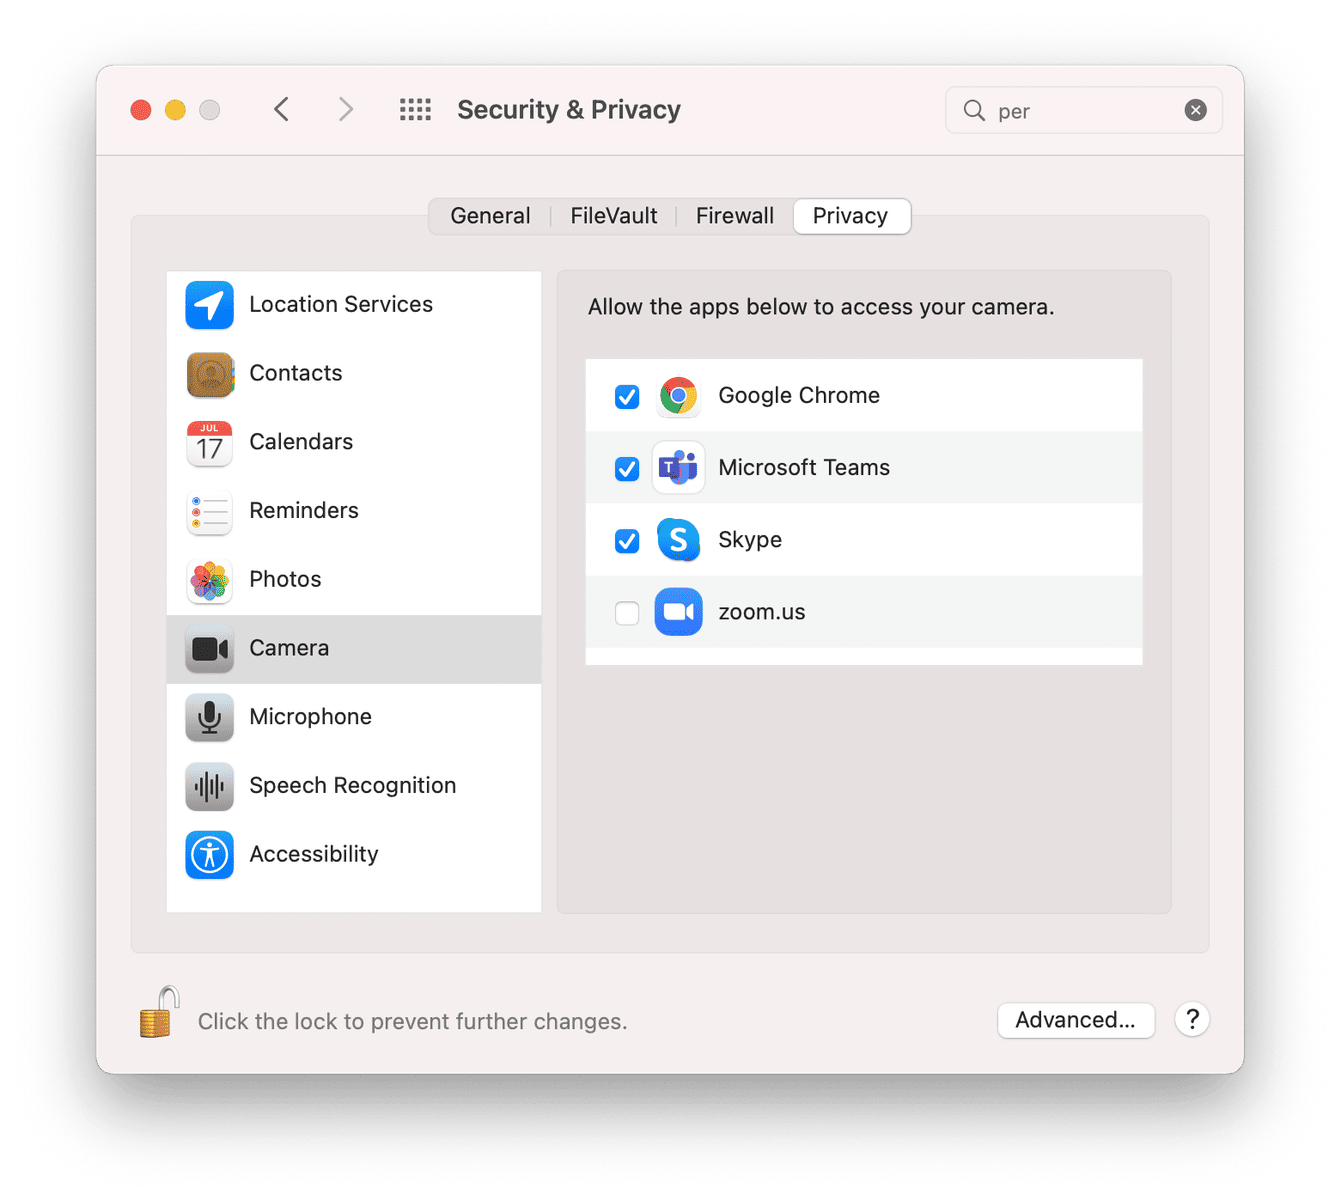 Security & Privacy settings